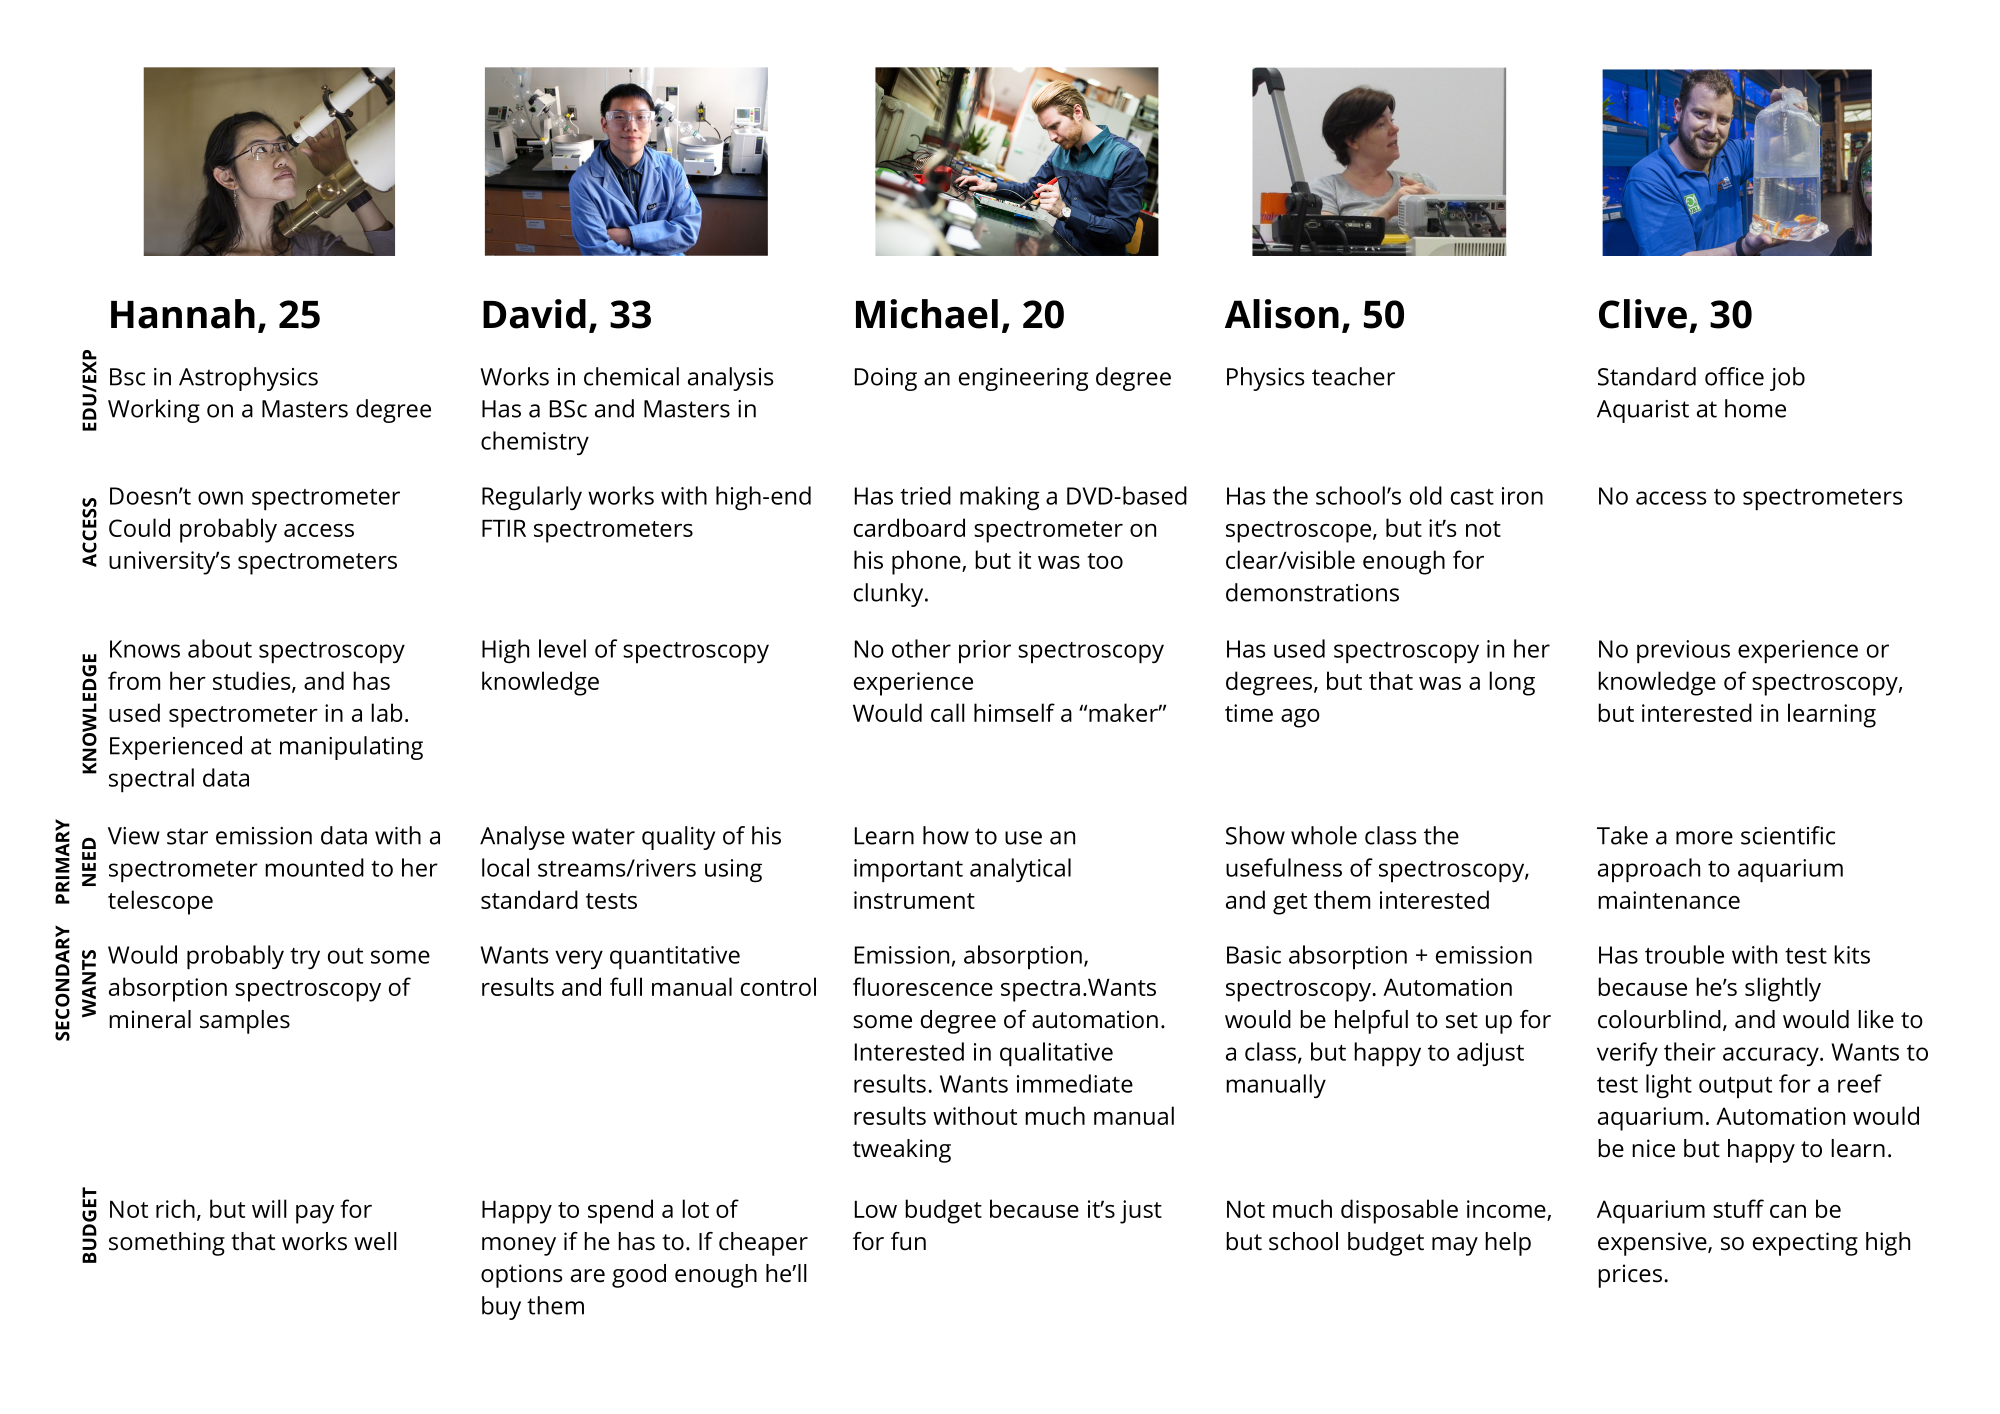 A page of 5 user personas, showing their background, wants/needs and budget